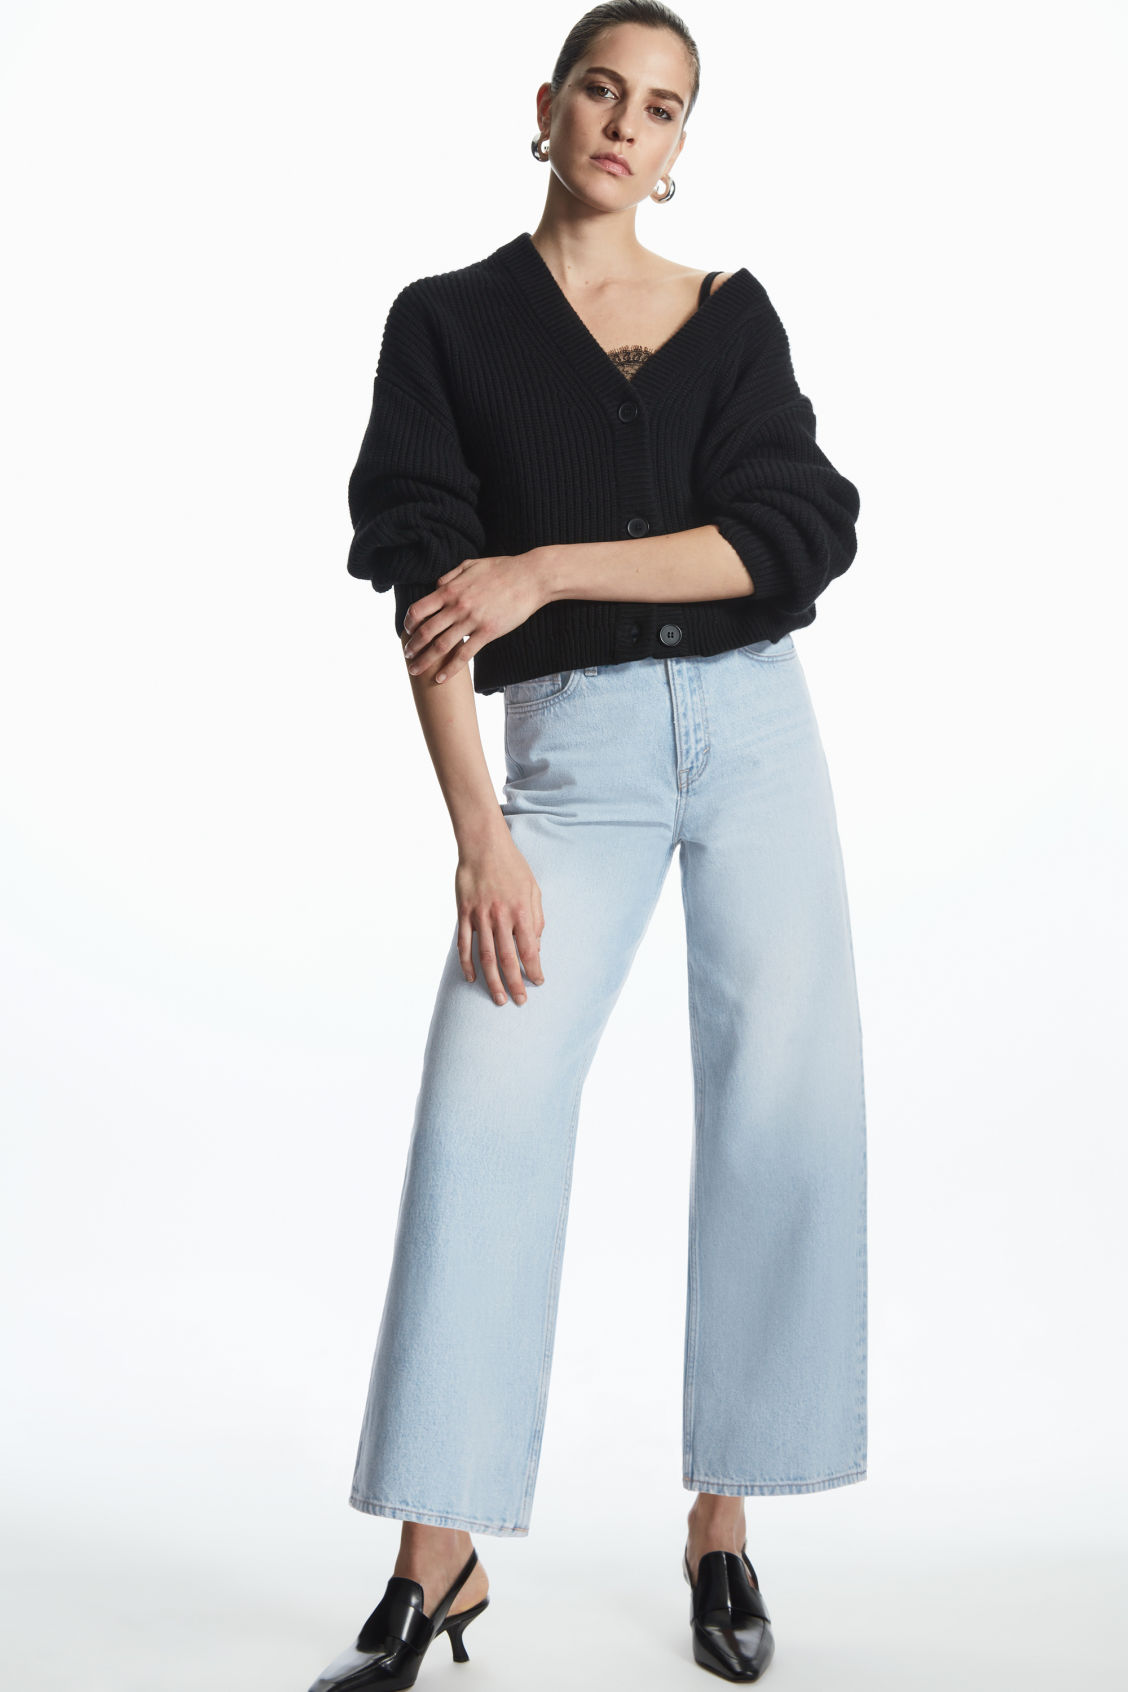 French Women Love the High-Rise Wide-Leg Jeans Trend | Who What Wear UK